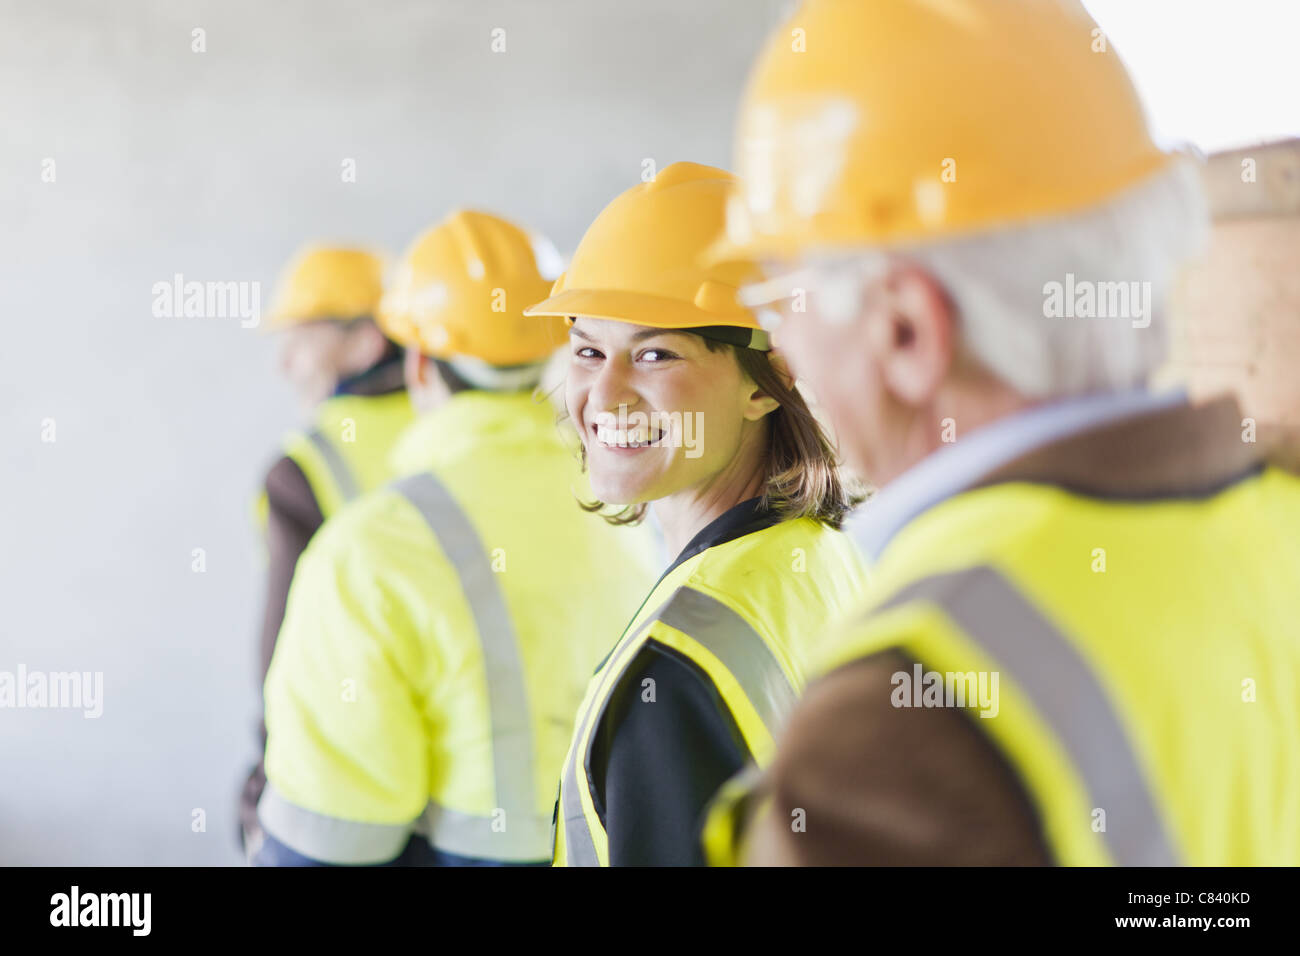 Construction worker smiling on site Stock Photo